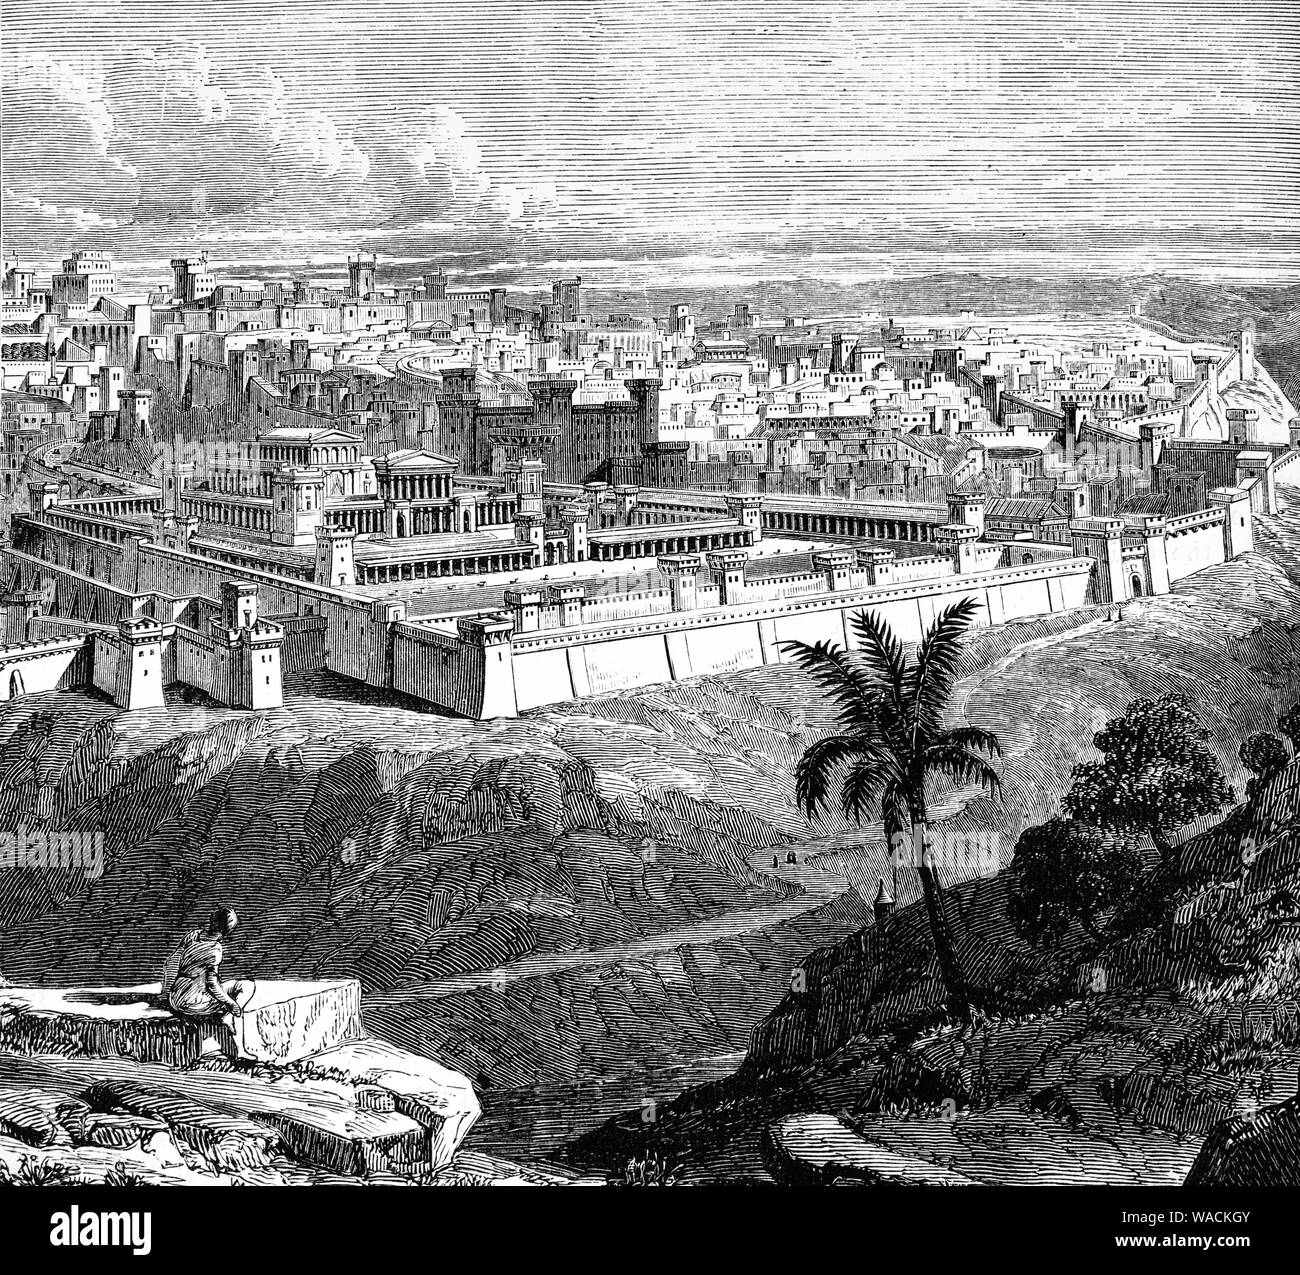 Jerusalem at the time of  the birth of Jesus Christ.  King Herod the Great,  (73 –  4 BCE) ruled over the Jews in Israel following his appointment by the Roman conquerers.  Once he was king, Herod launched an ambitious building program, both in Jerusalem and the spectacular port city of Caesarea, named after the emperor. He restored the magnificent Jerusalem temple, which was later destroyed by the Romans following a rebellion in A.D. 70. Stock Photo